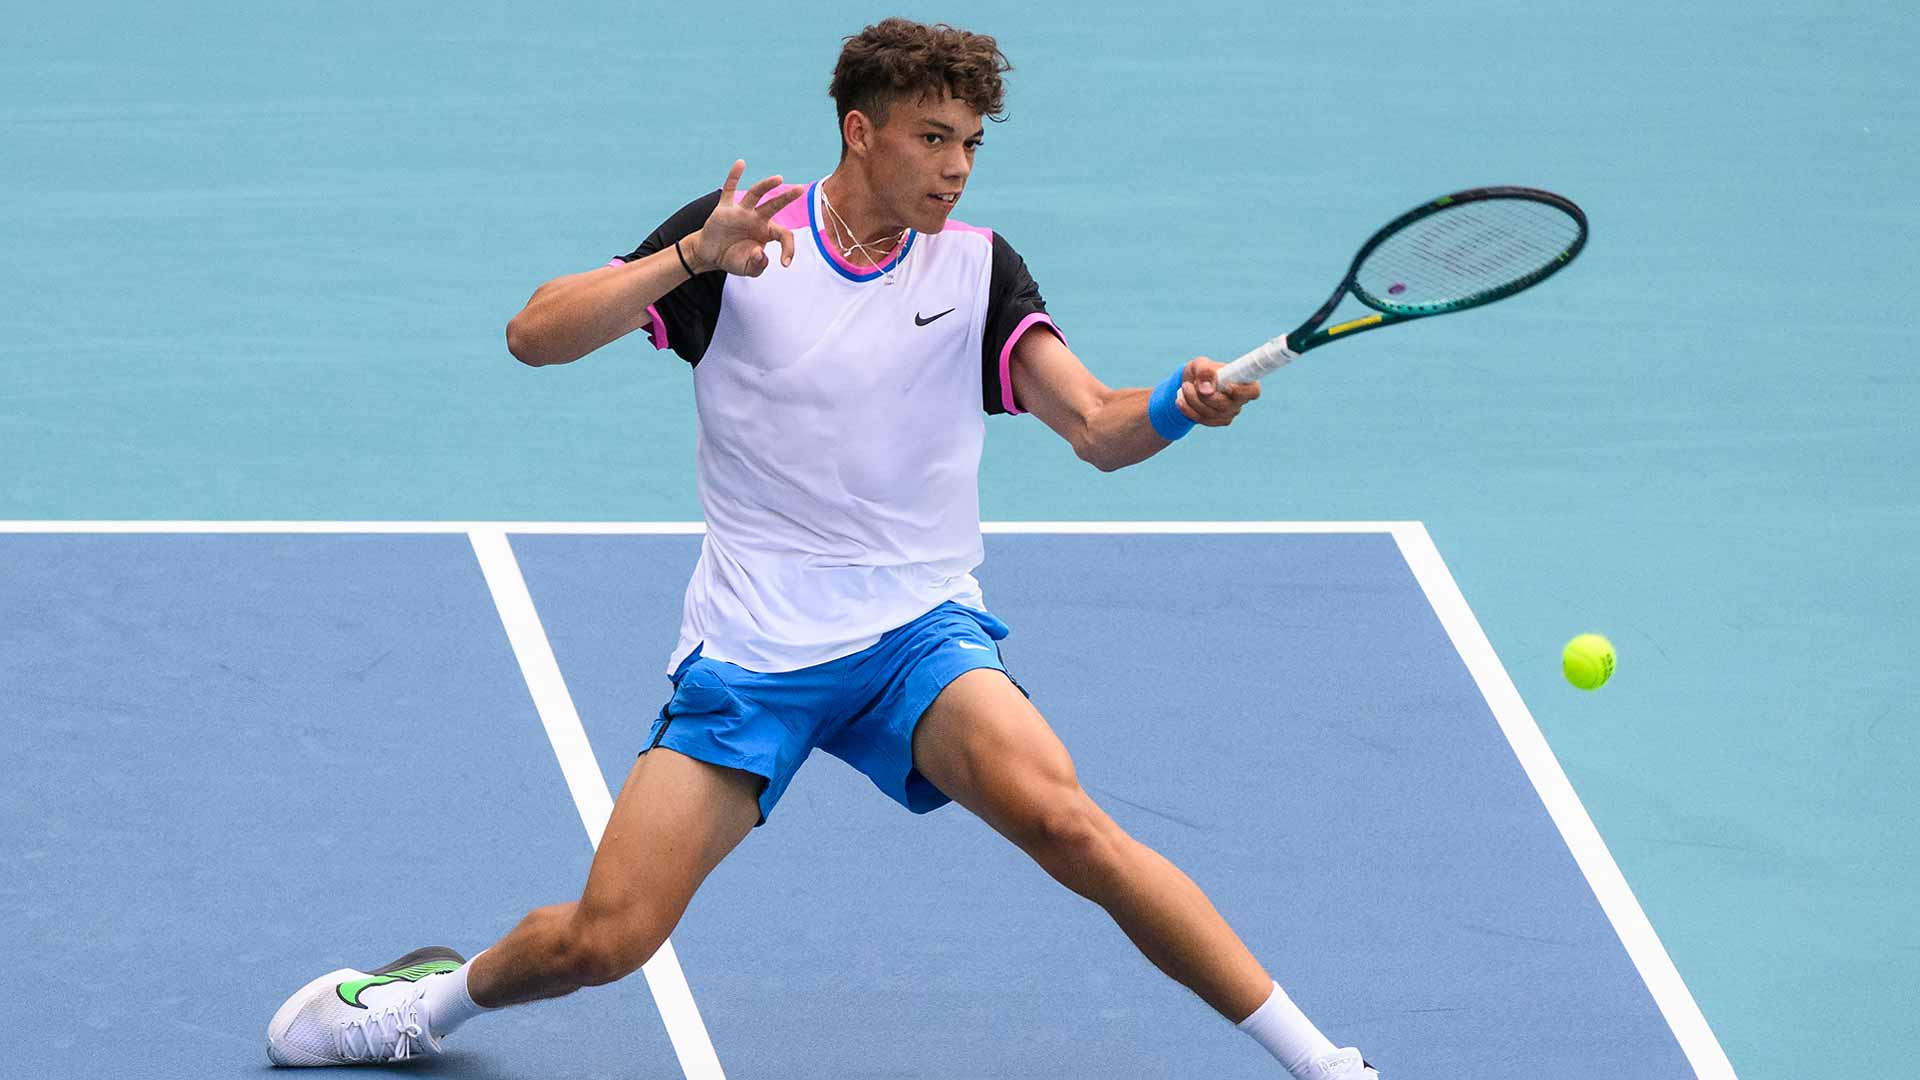 Darwin Blanch will make his Mutua Madrid Open debut against Rafael Nadal on Thursday at the Caja Magica. (File photo)